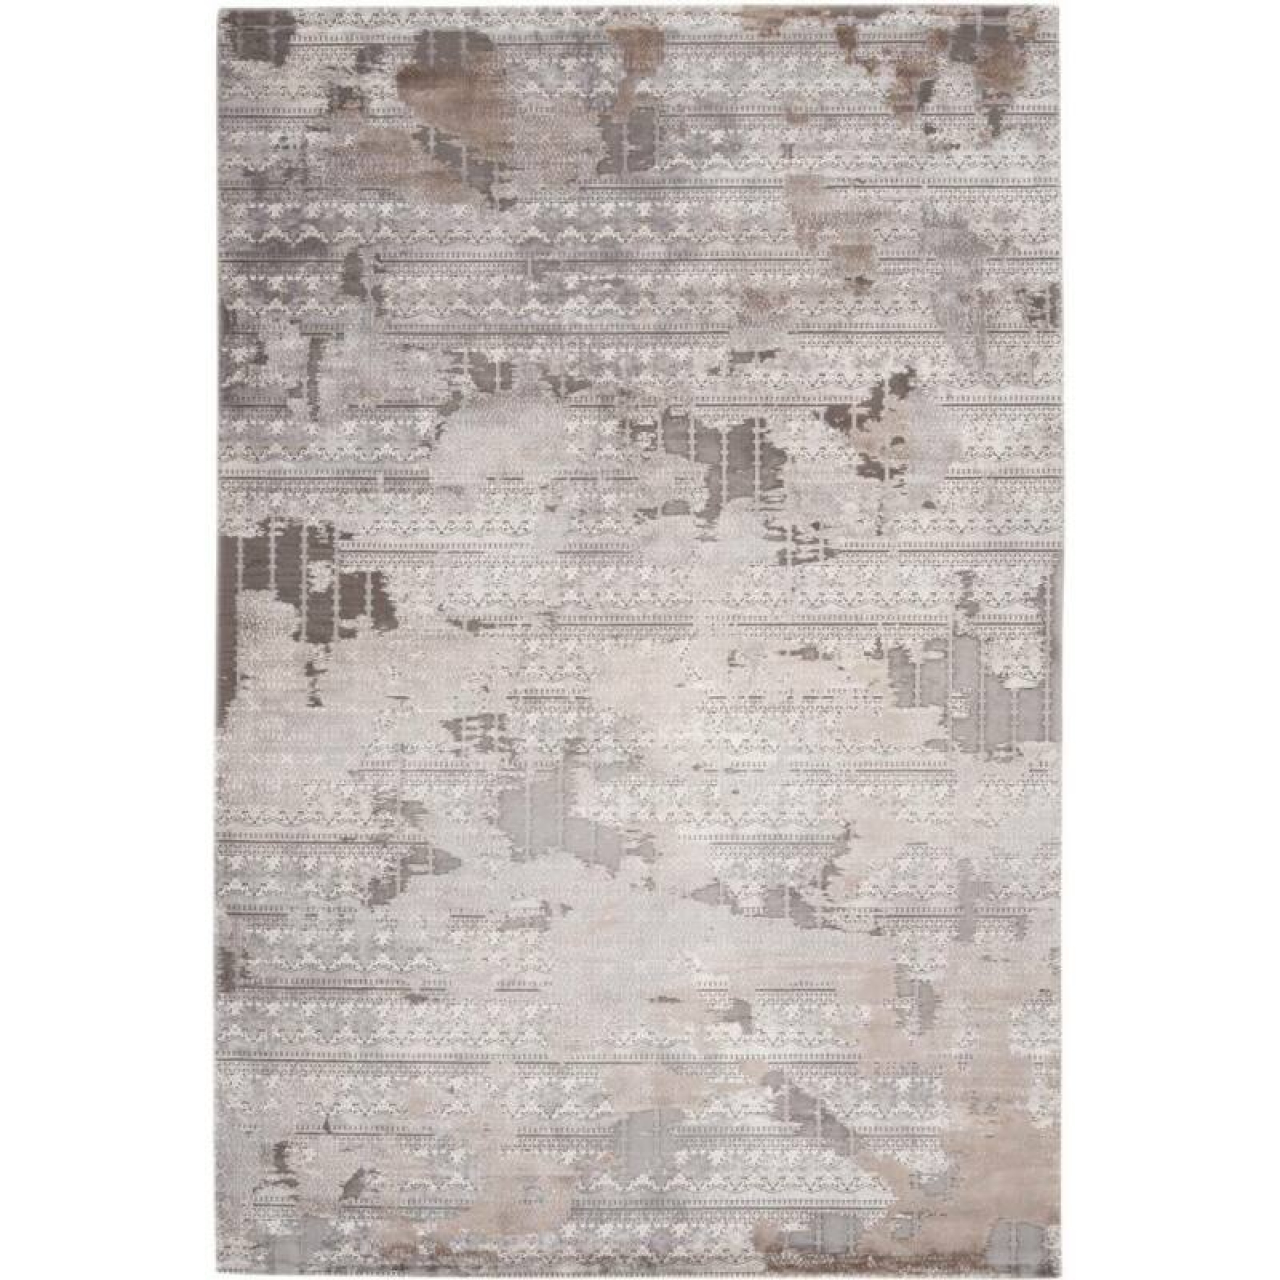 Obsession Haute Couture Jewel 955 Taupe szőnyeg-80x150